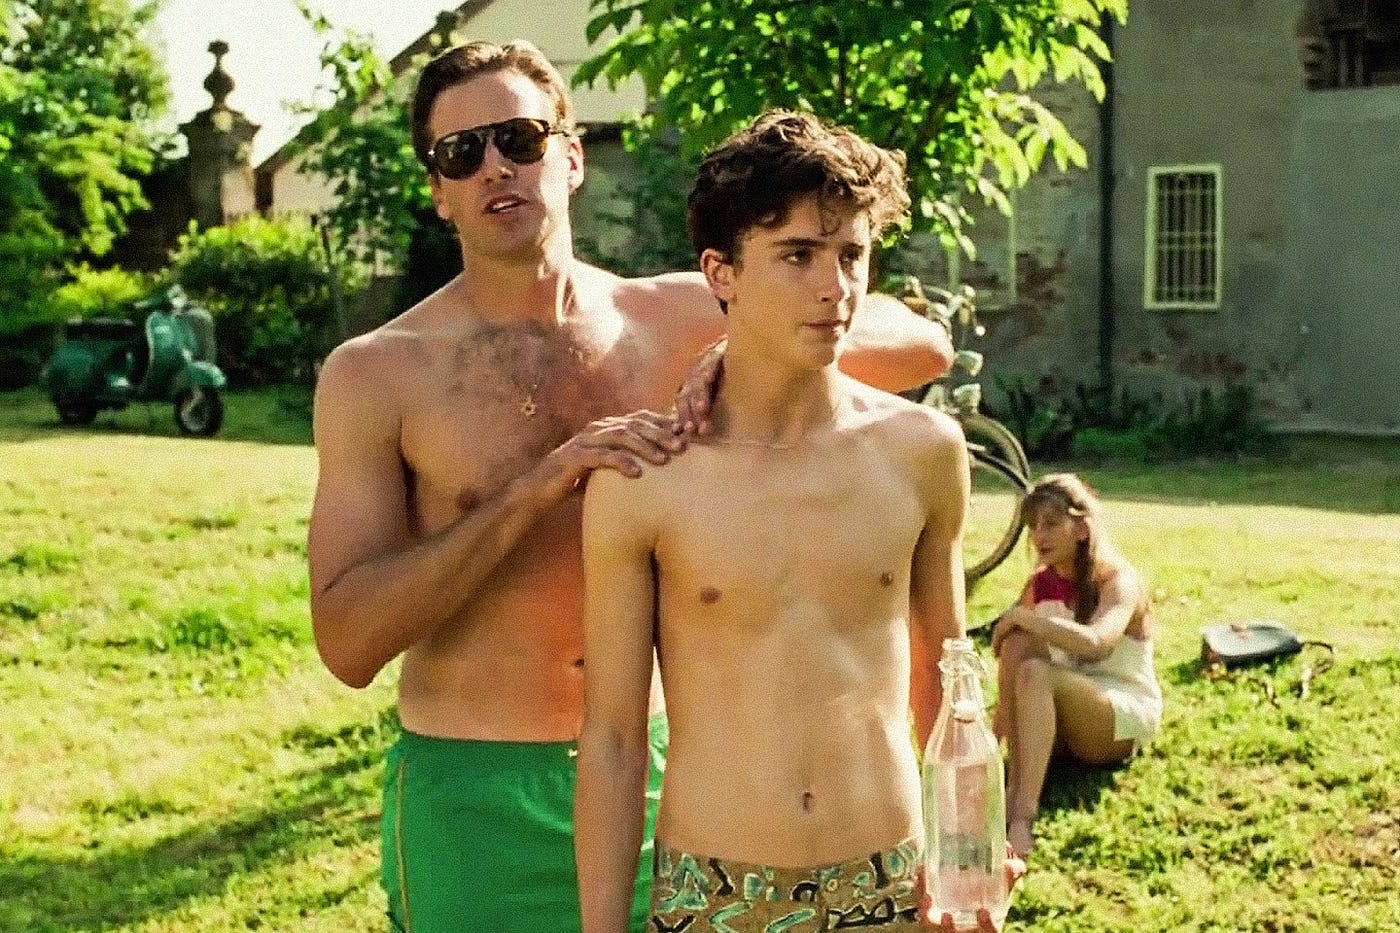 The Problem With “Call Me By Your Name” | by Andrea Merodeadora | Medium